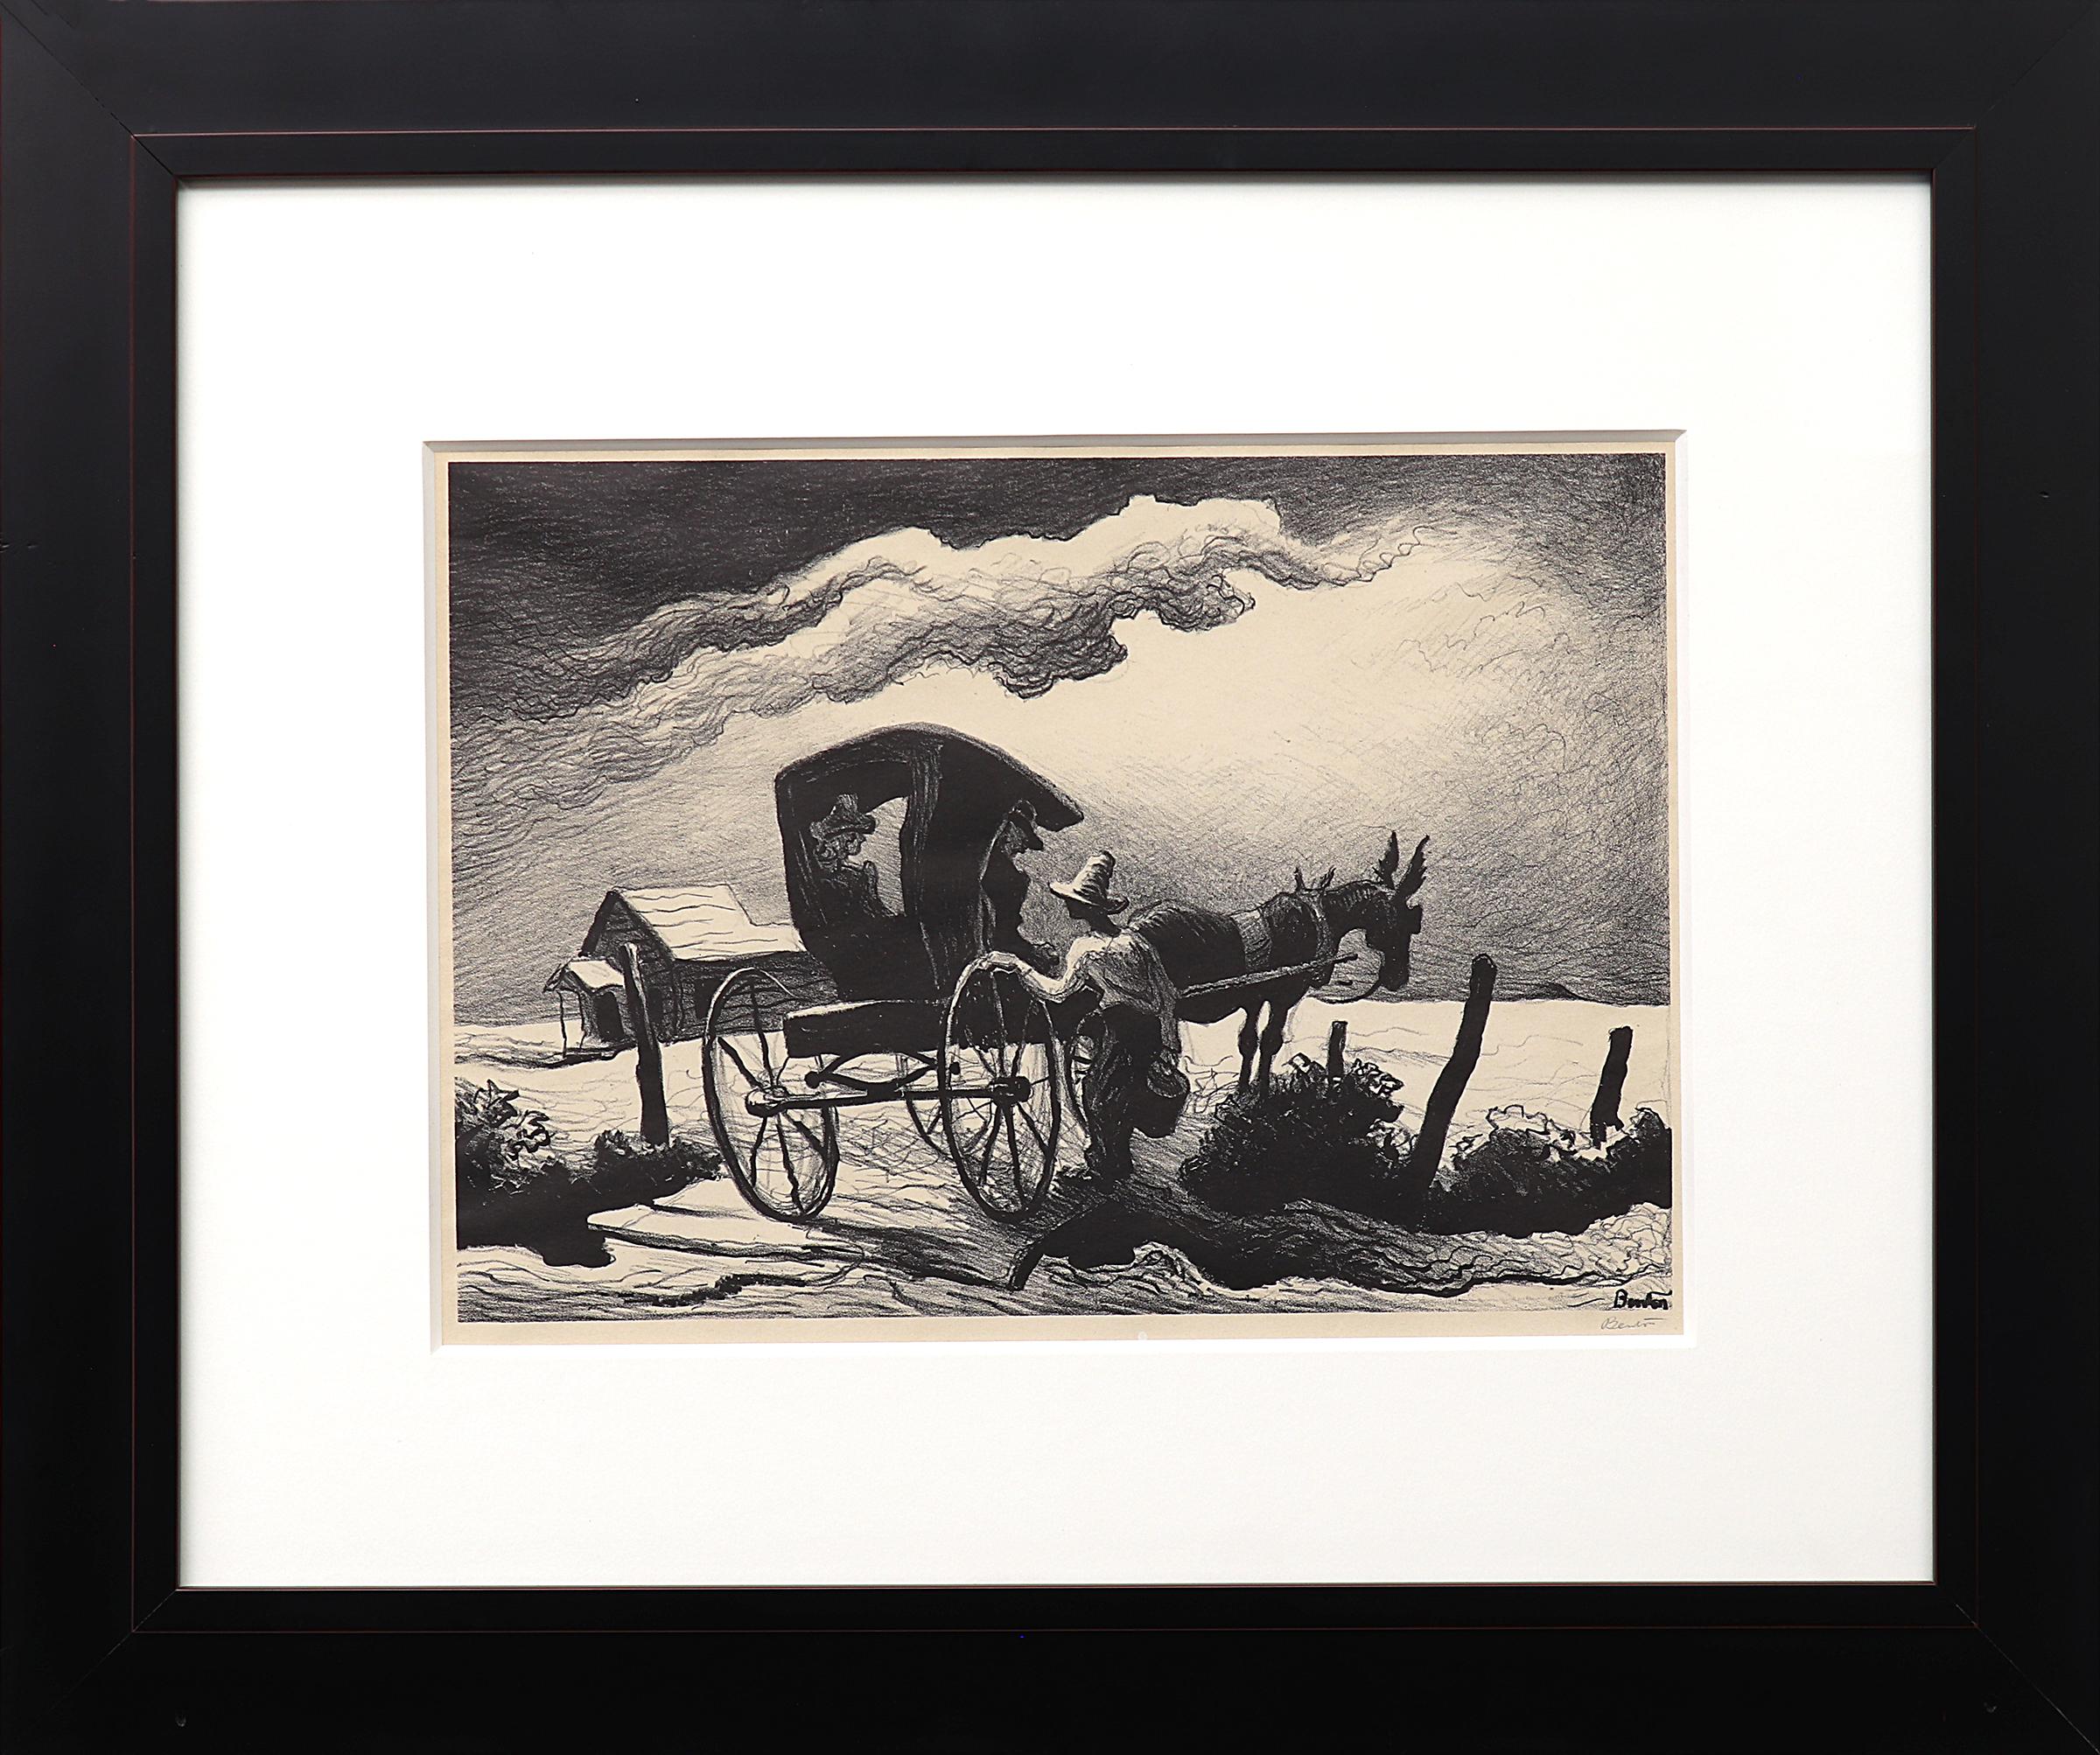 'Gateside Conversation' is an original signed lithograph by Thomas Hart Benton (1889-1975) from 1946. Singed by the artist in the lower right margin and titled verso. Portrays a figure in a horse drawn carriage talking with a figure wearing a hat